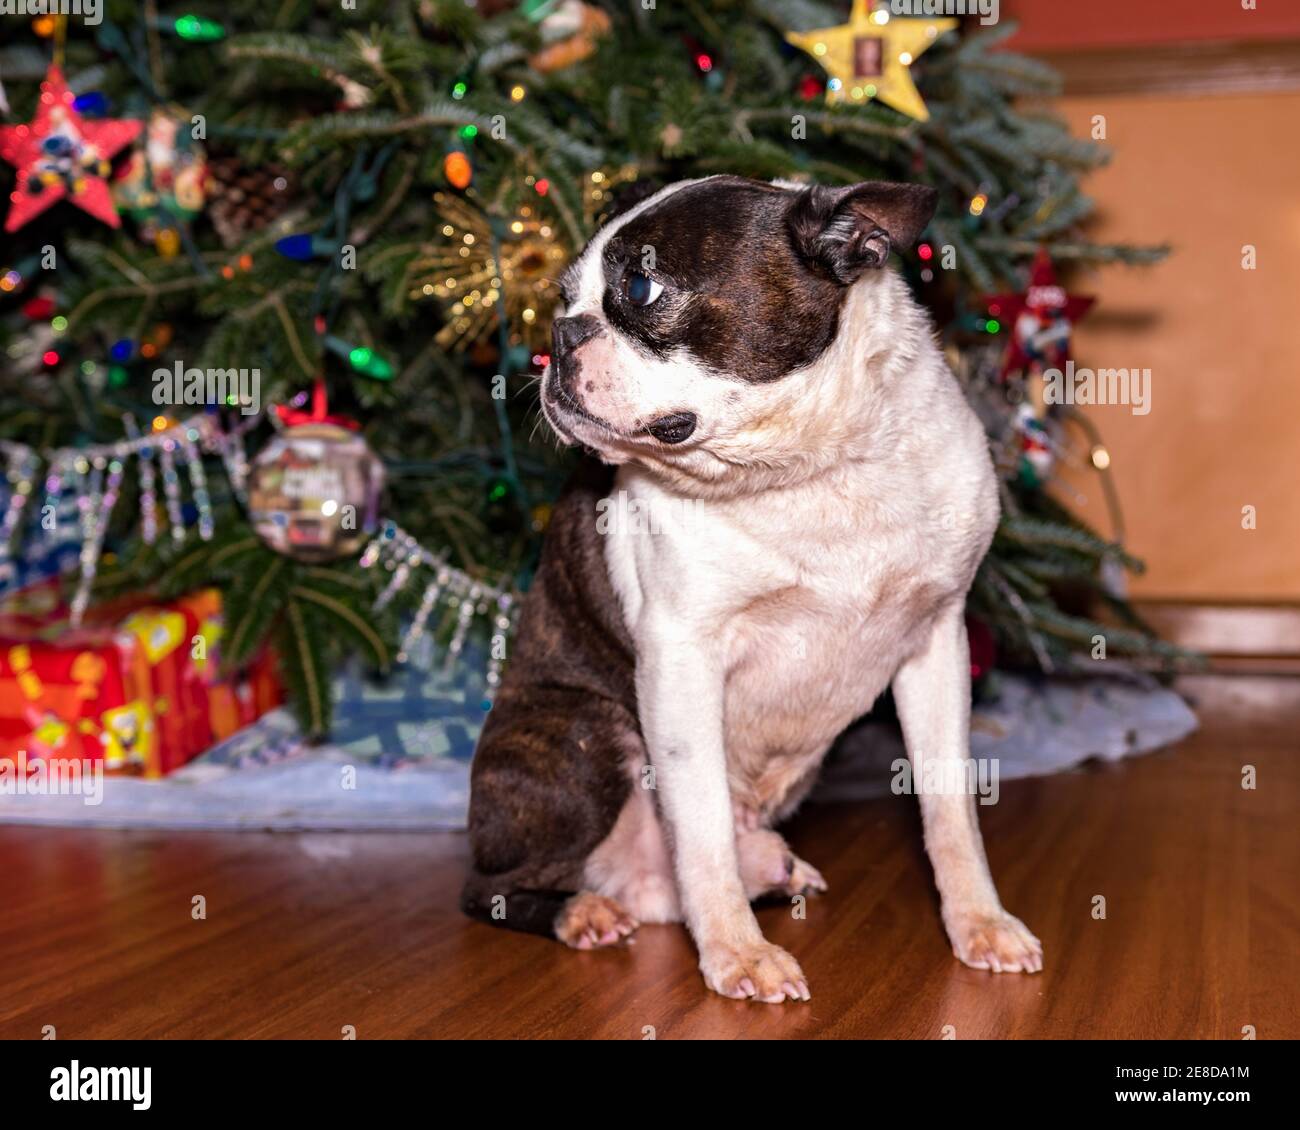 Brindled Boston Terrier looking back over his shoulder with a Christmas tree out of focus in the background - 5:4 ratio Stock Photo